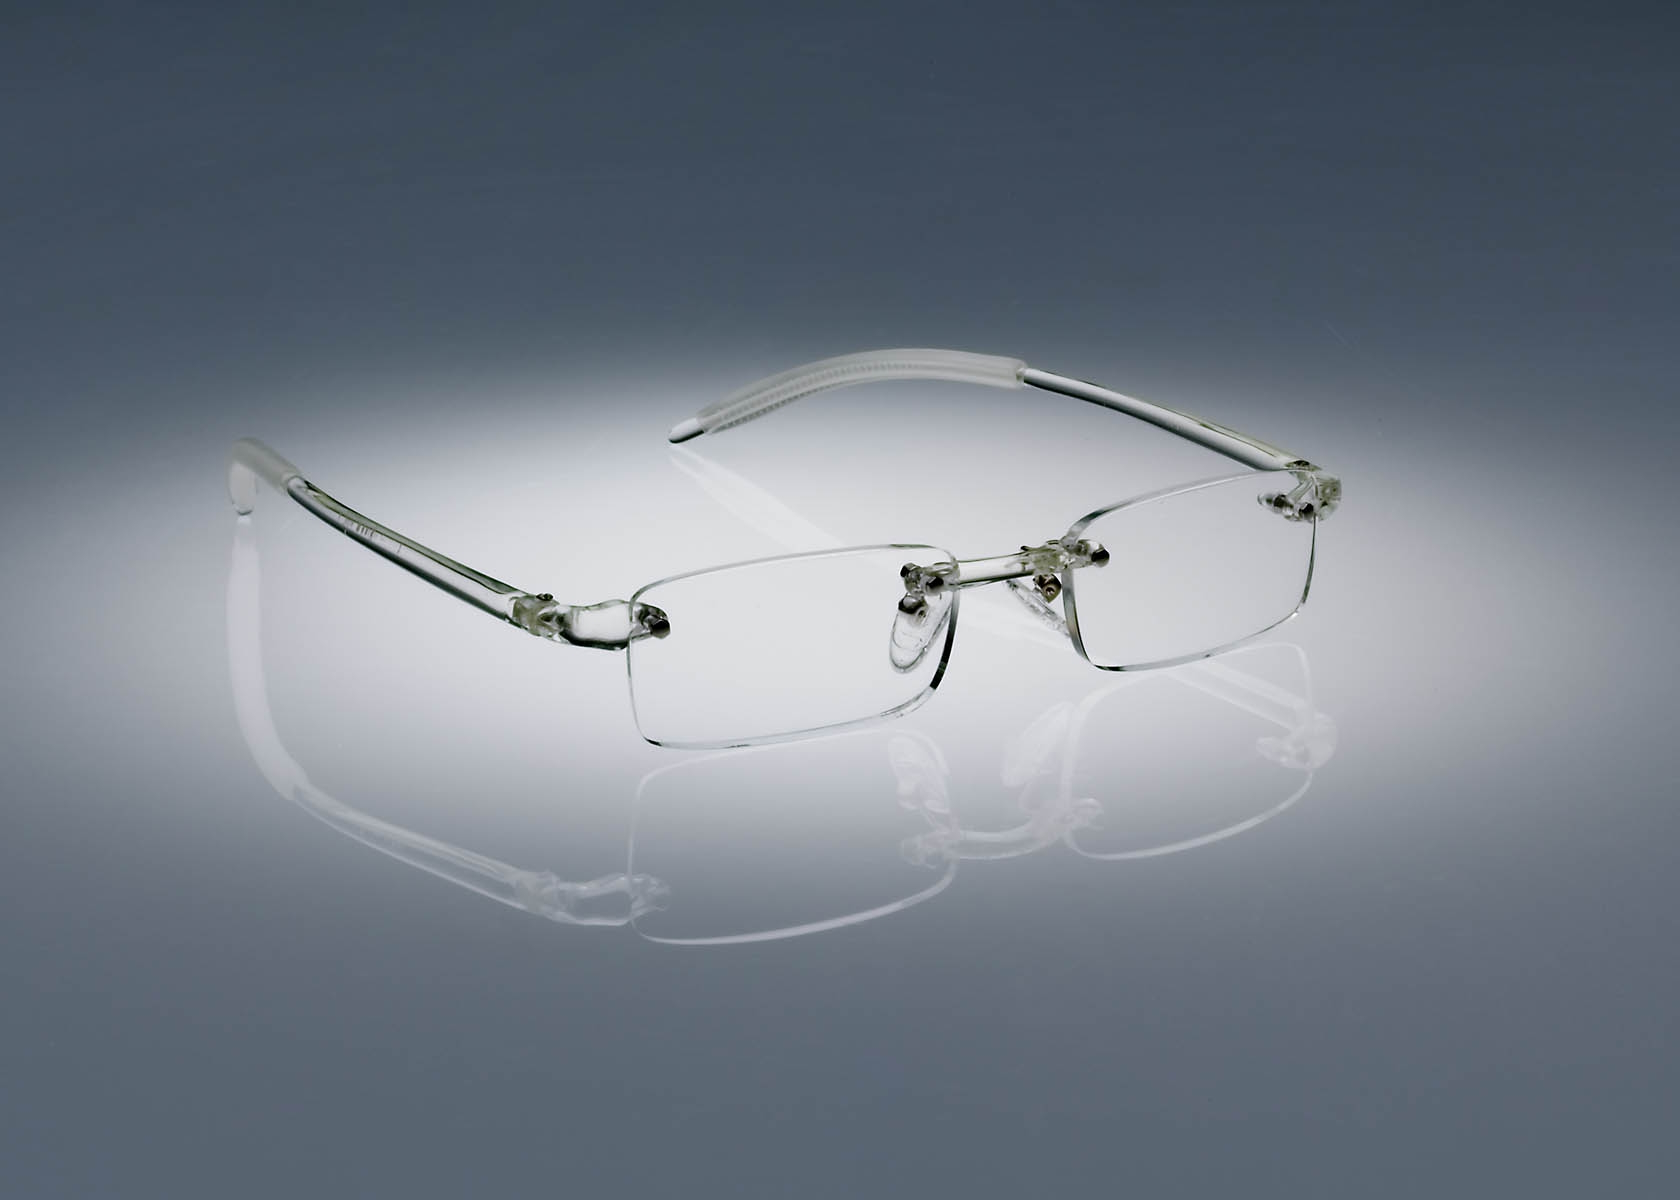 A pair of clear colored Ultimate Reading Glasses resting on a table, illuminated by a soft spotlight.